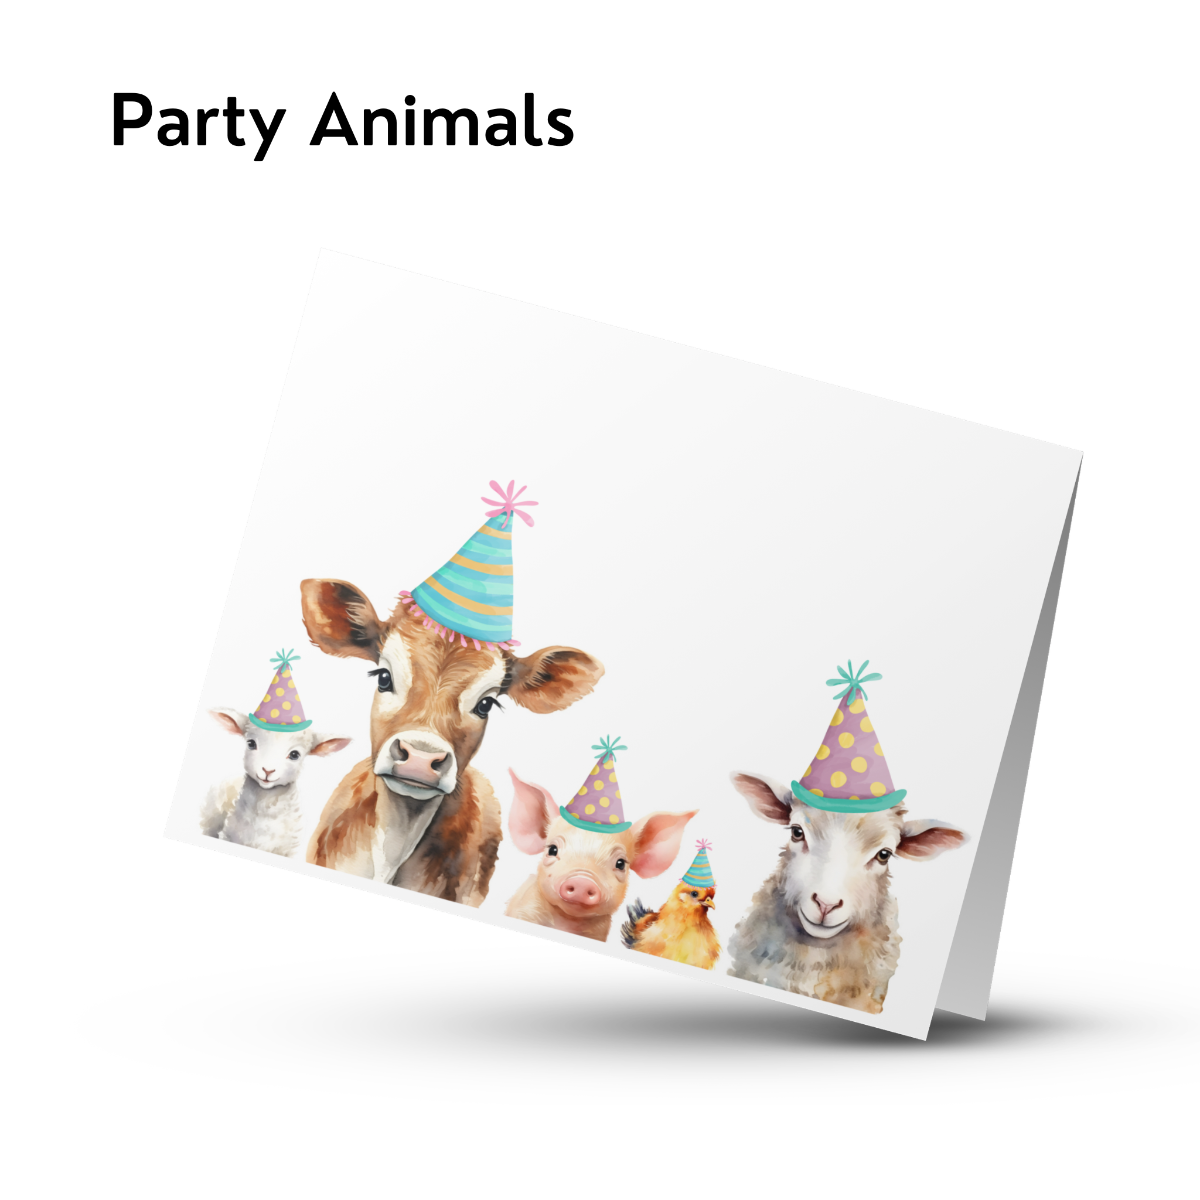 Party Animals greeting card